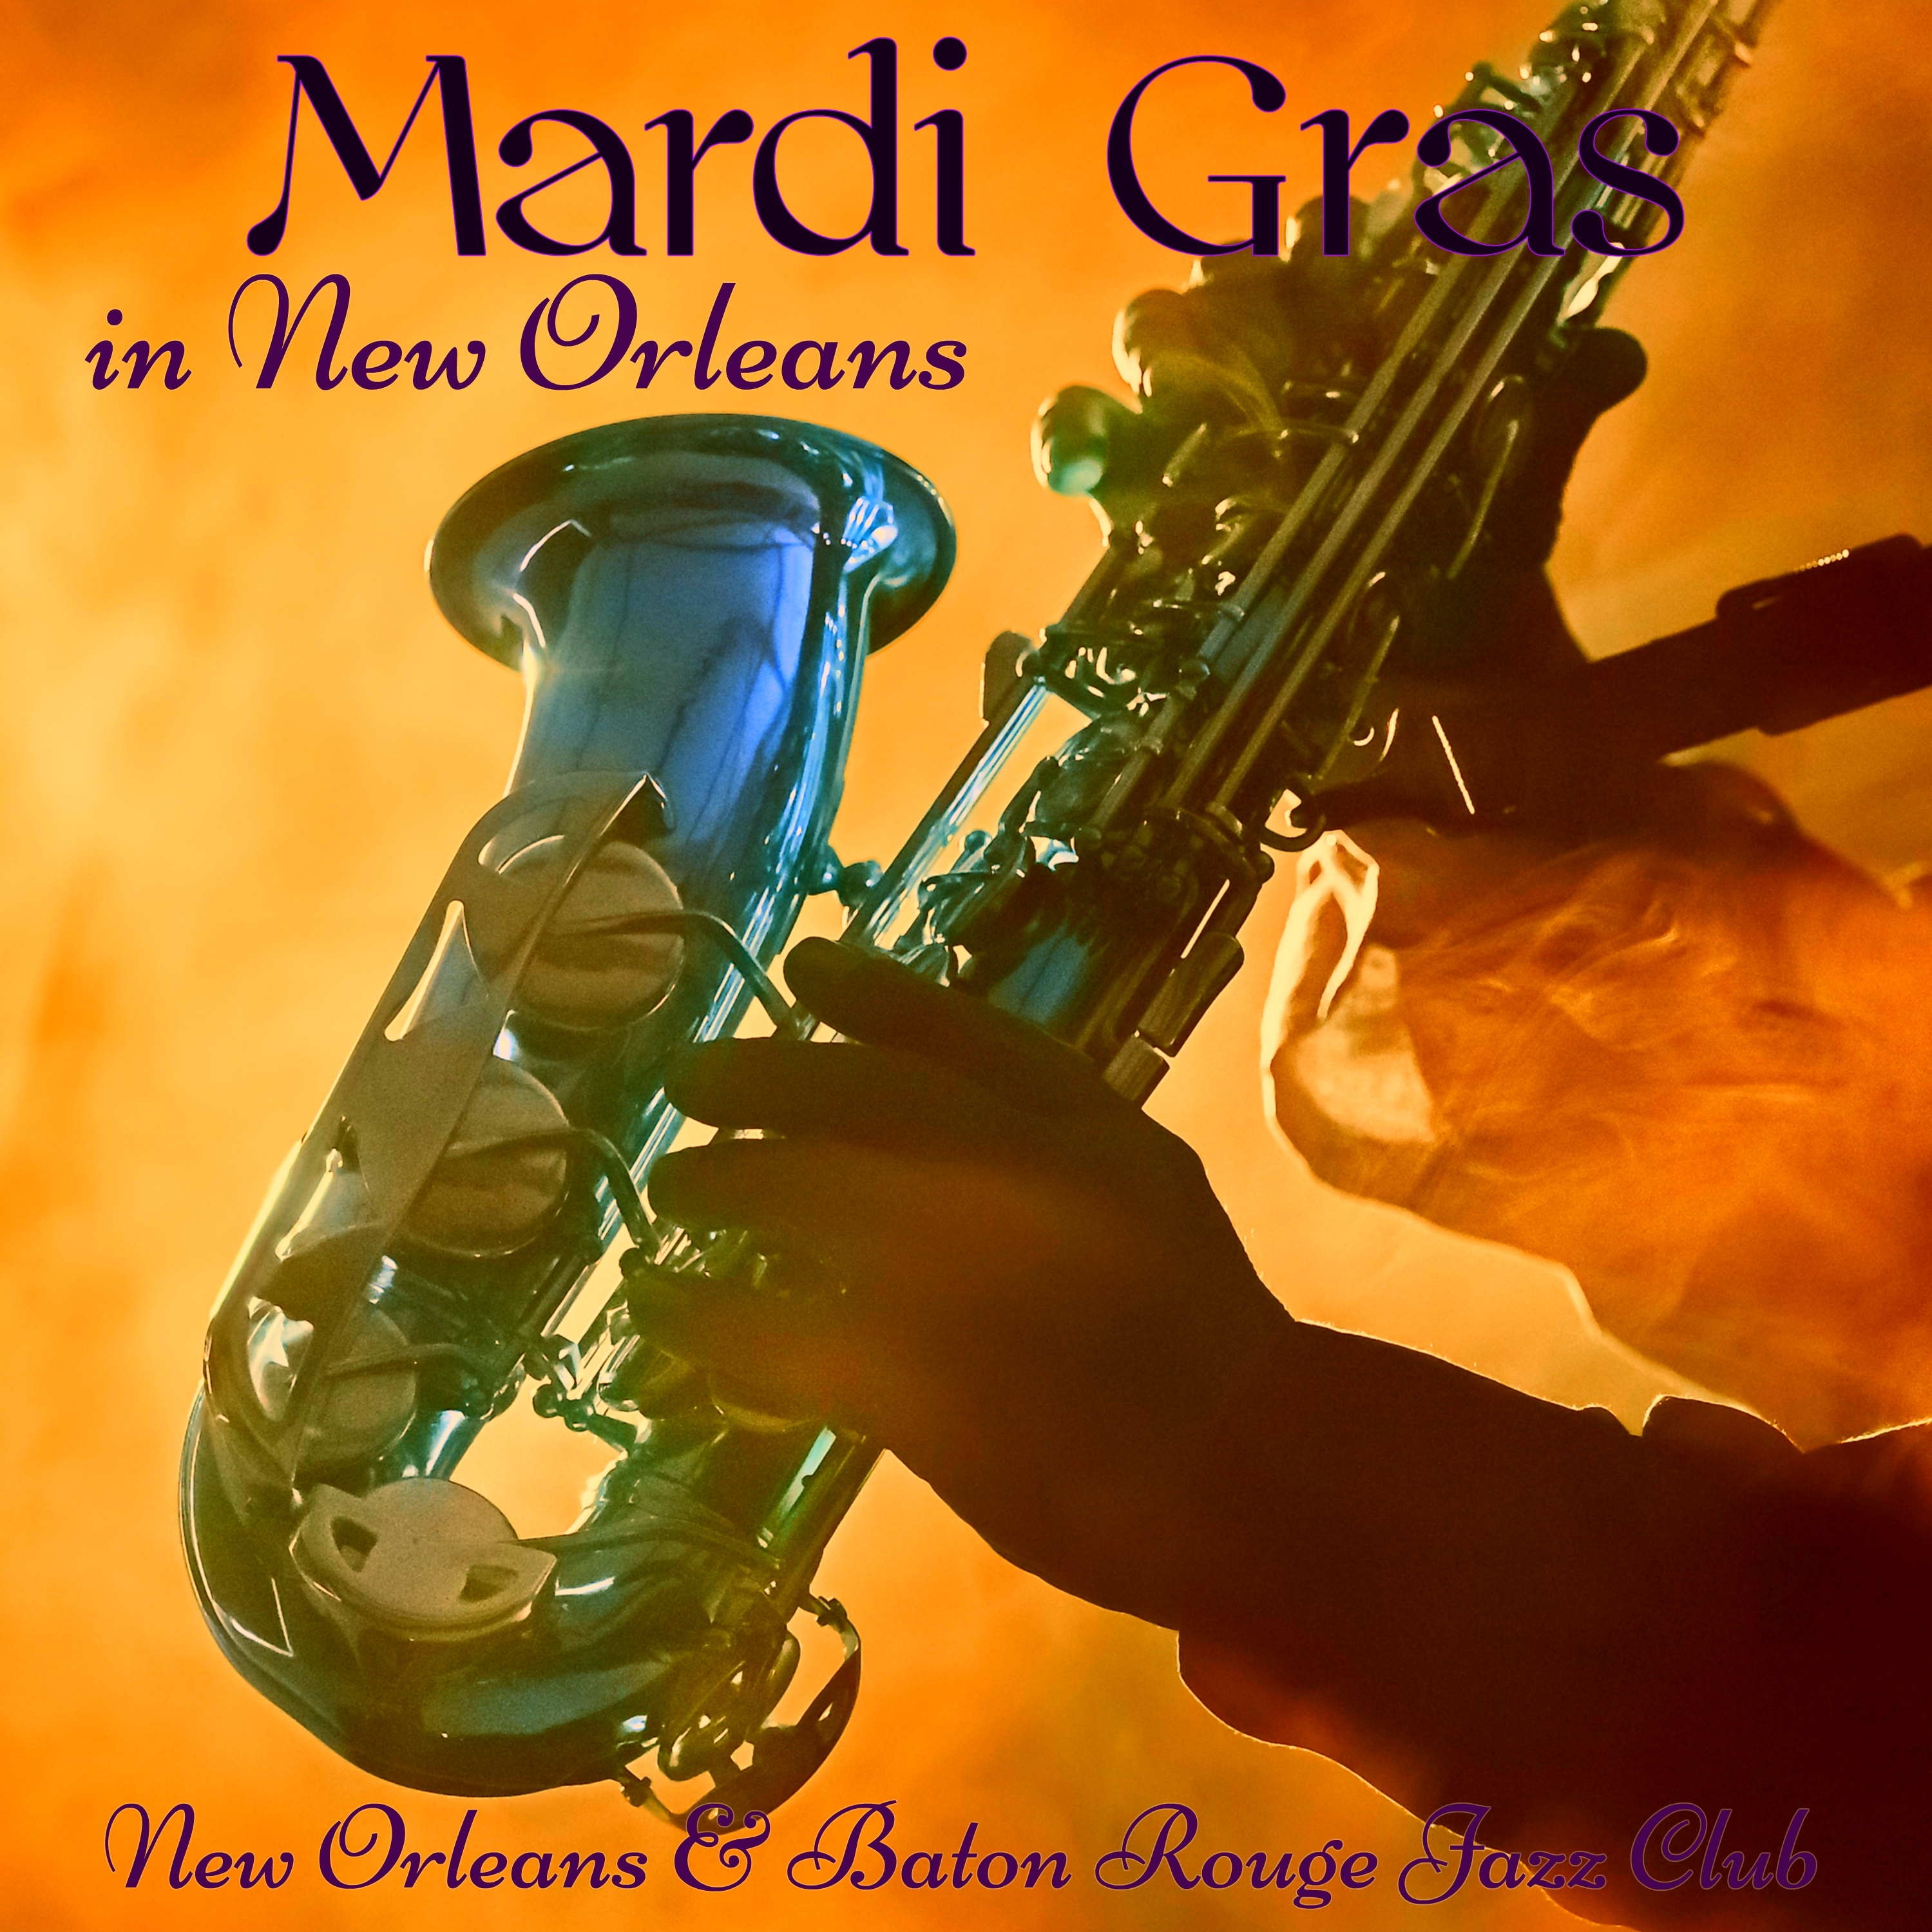 Mardi Gras in New Orleans – Jazz Band Session at the New Orleans & Baton Rouge Jazz Club